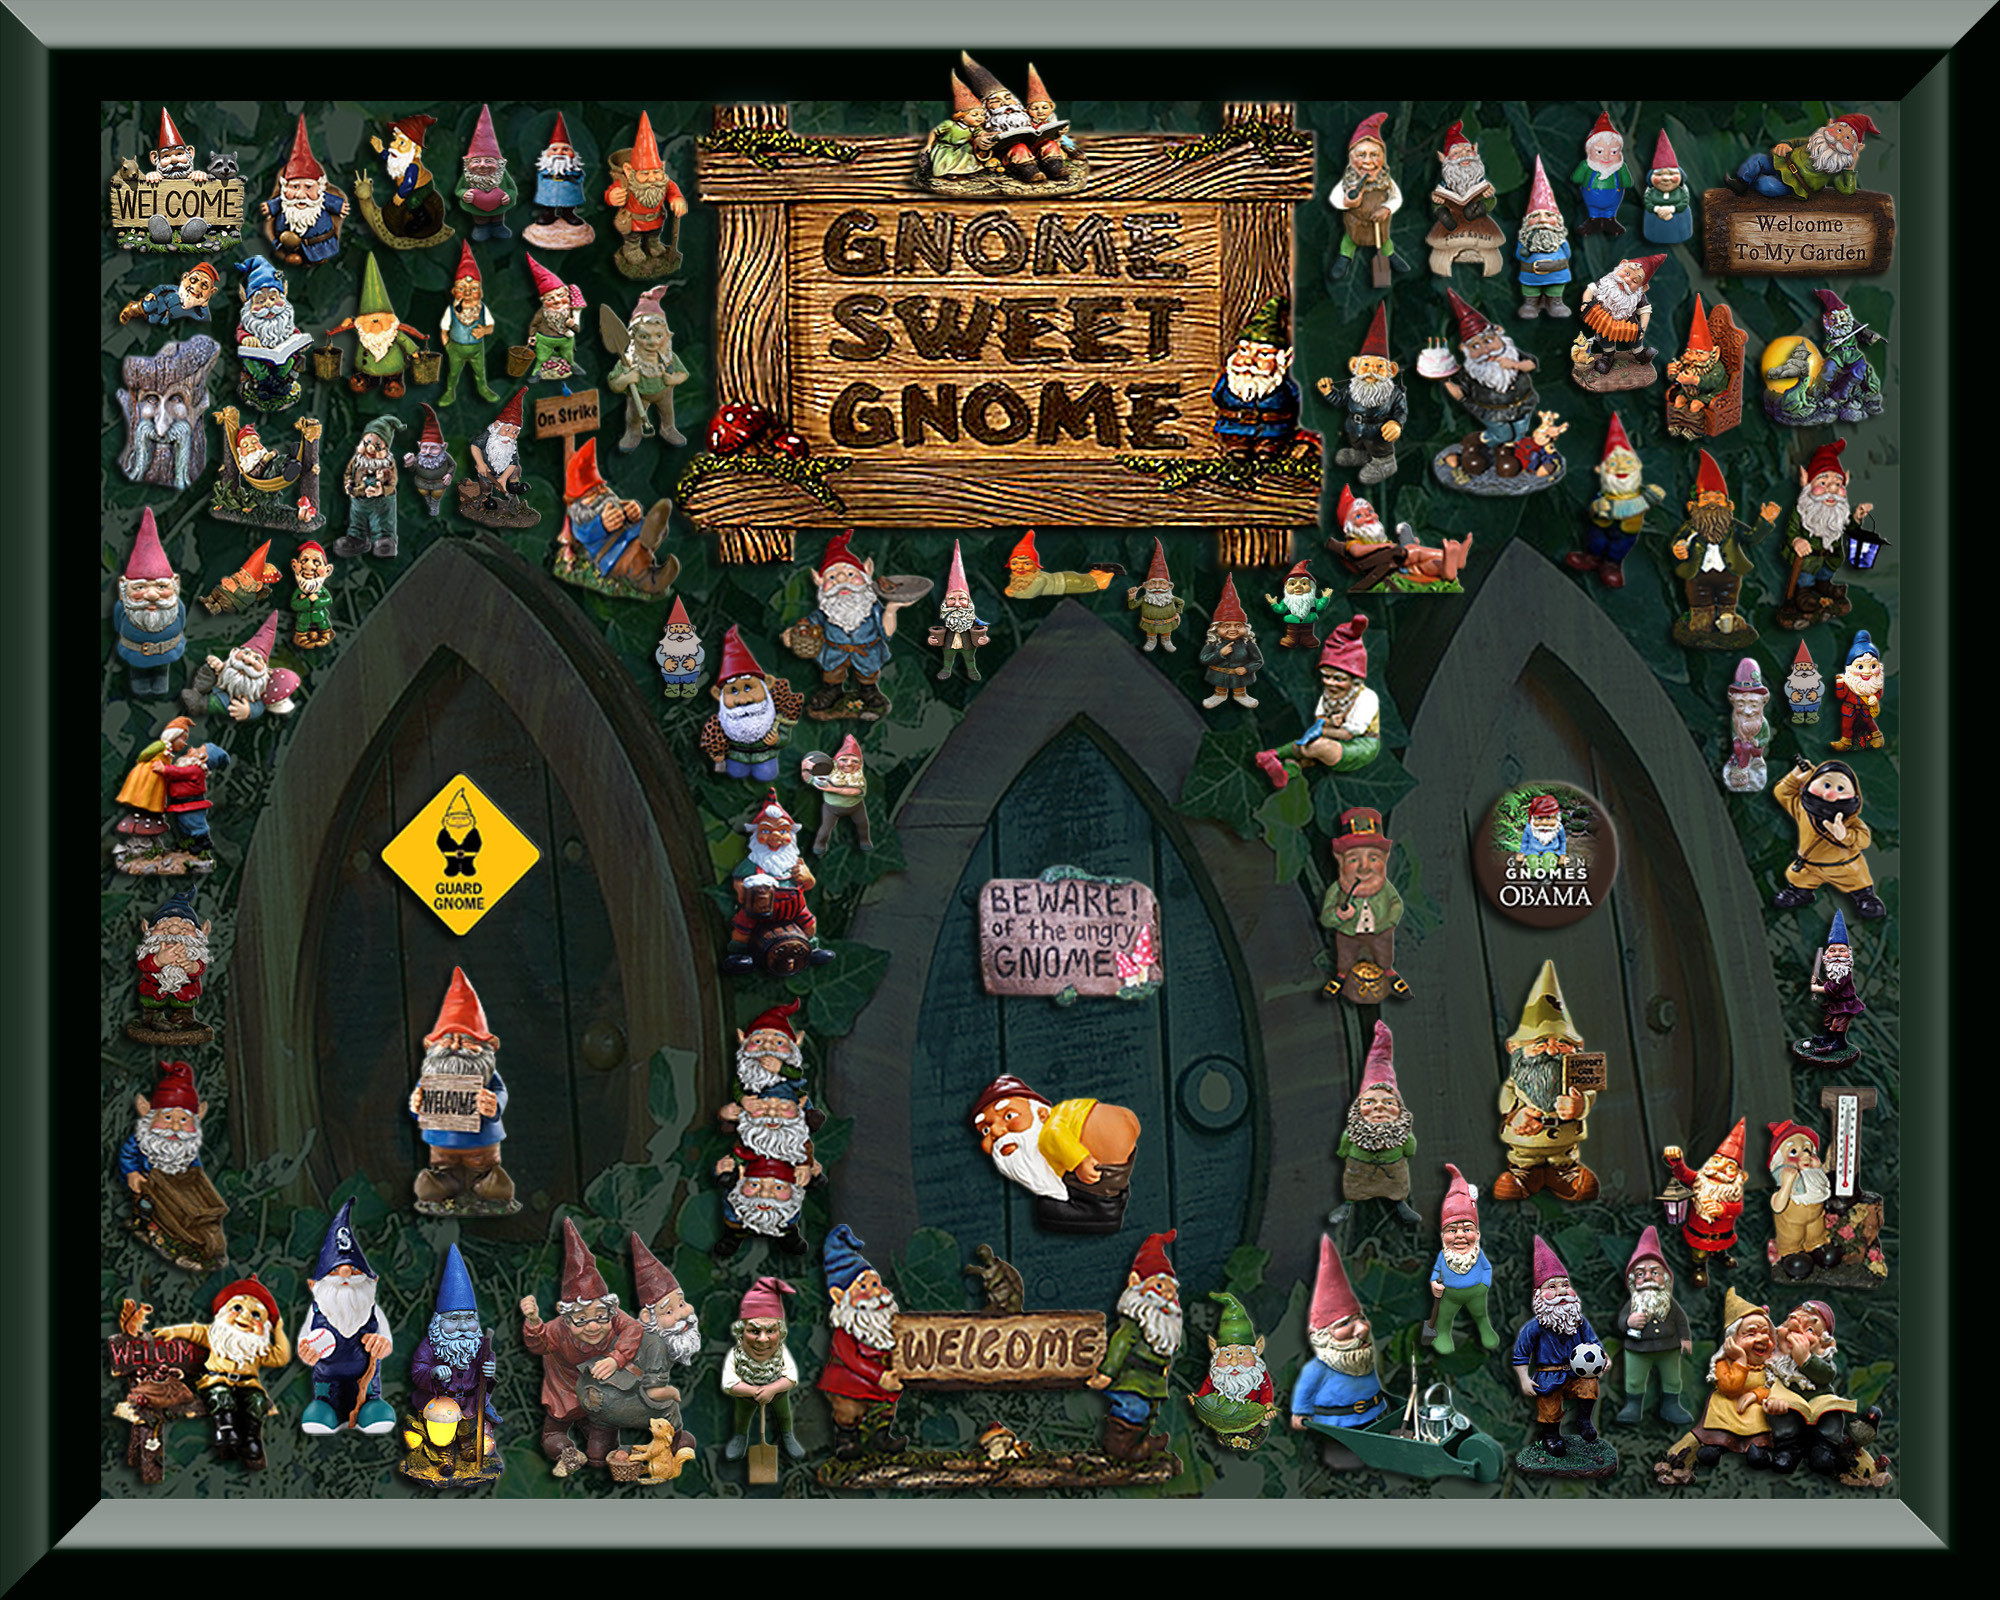 2000x1600 Gnomes images Gnomes HD wallpaper and background photos